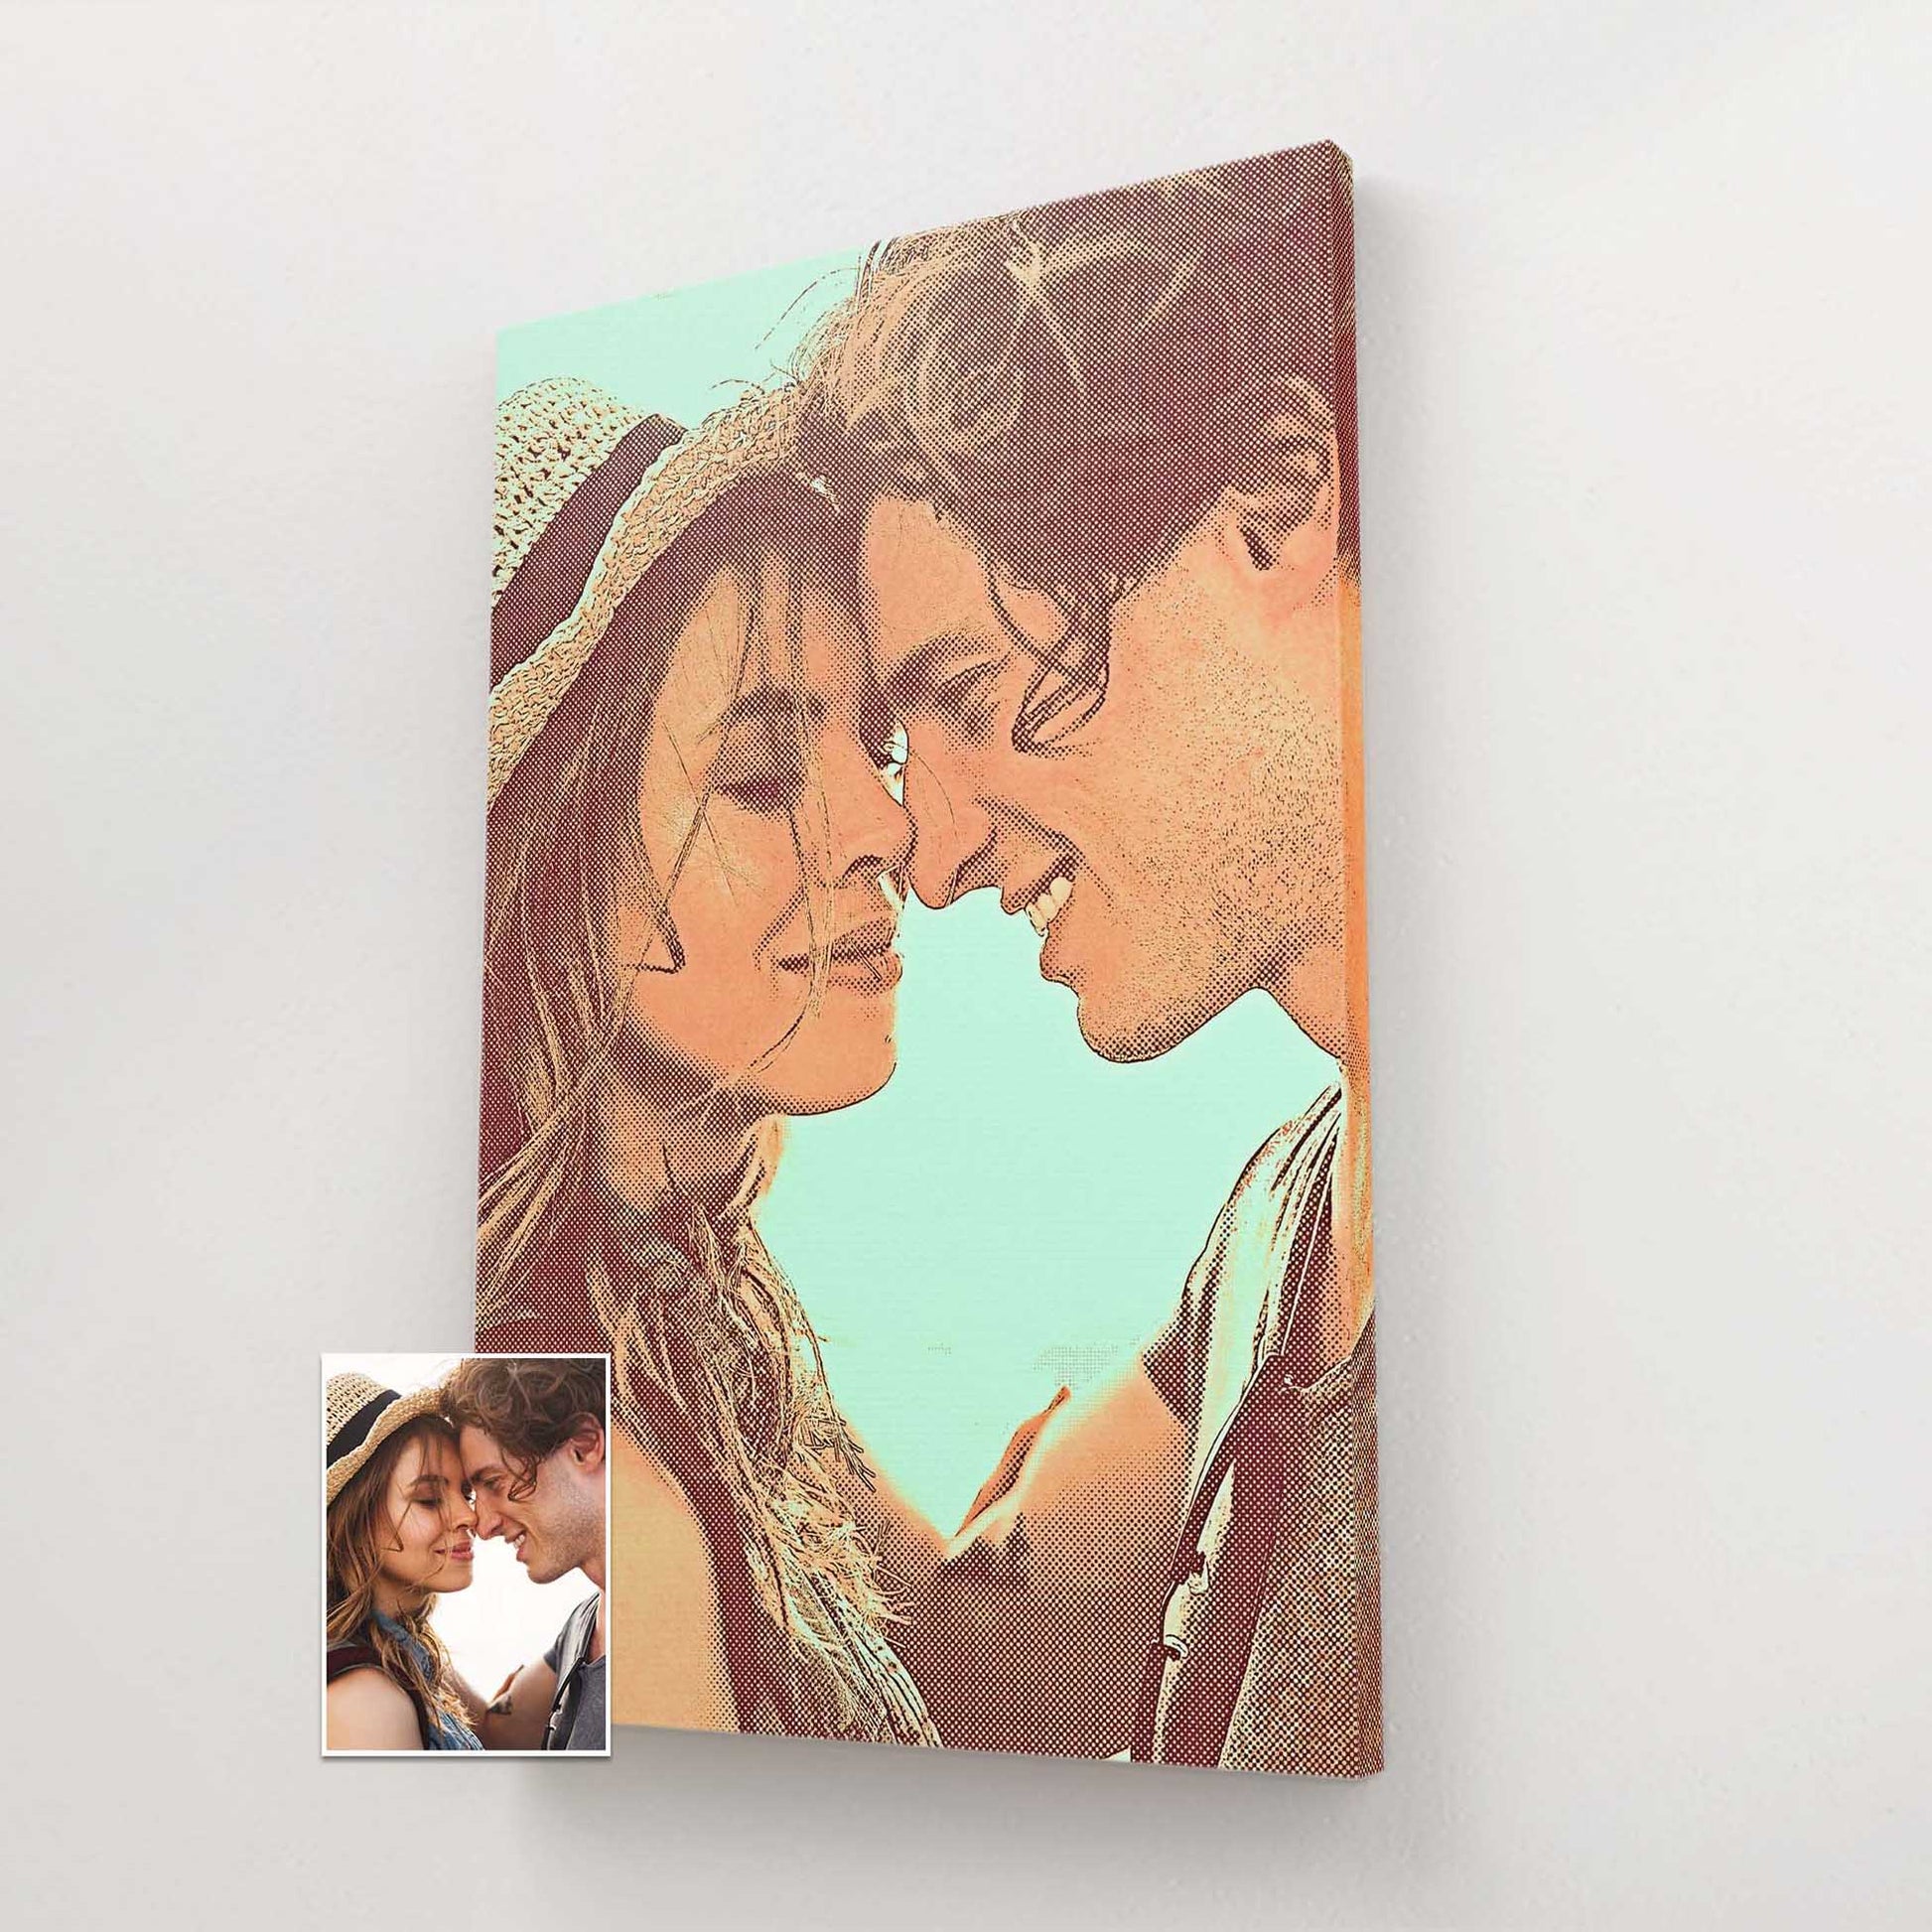 Unleash the power of personalization with the Personalised Orange and Green Canvas. This exquisite artwork, created from your cherished photo, is printed on a handmade woven canvas, showcasing a unique drawing